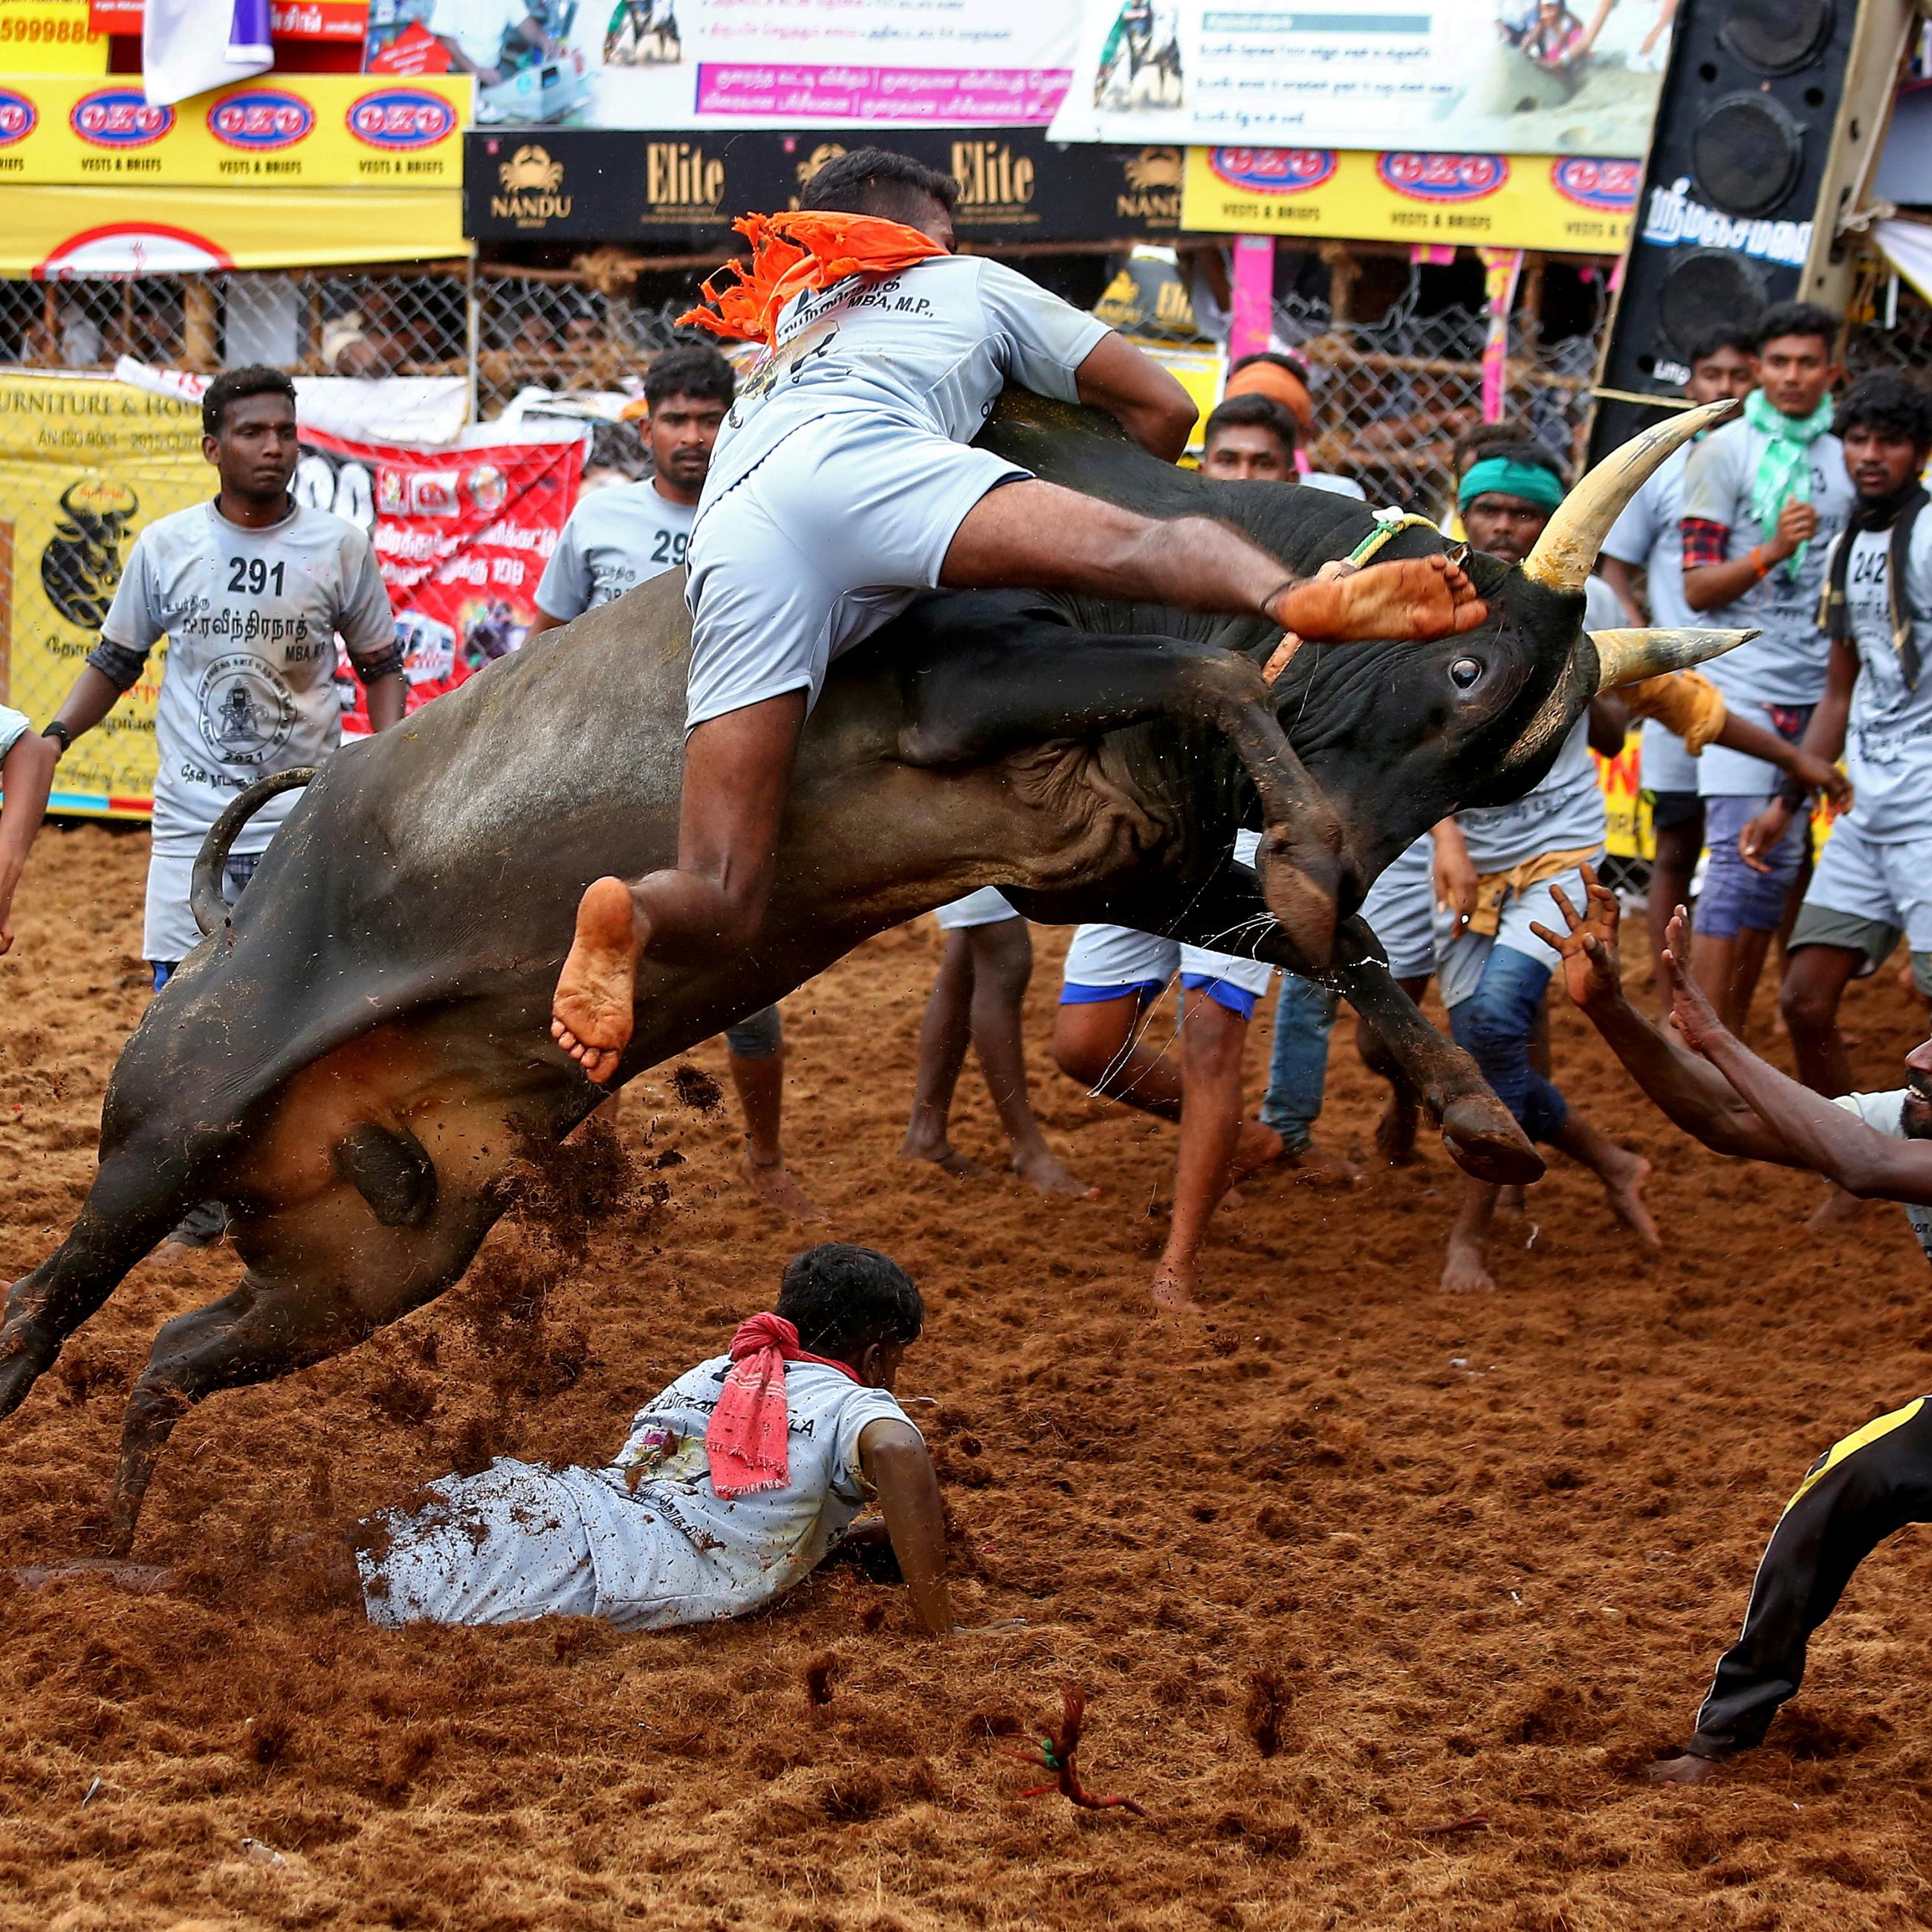 Villagers try to control a bull during a bull-taming festival, known as Jallikattu and is a part of south India's harvest festival of Pongal, on the outskirts of Madurai town, Tamil Nadu state, India, on January 15, 2021.